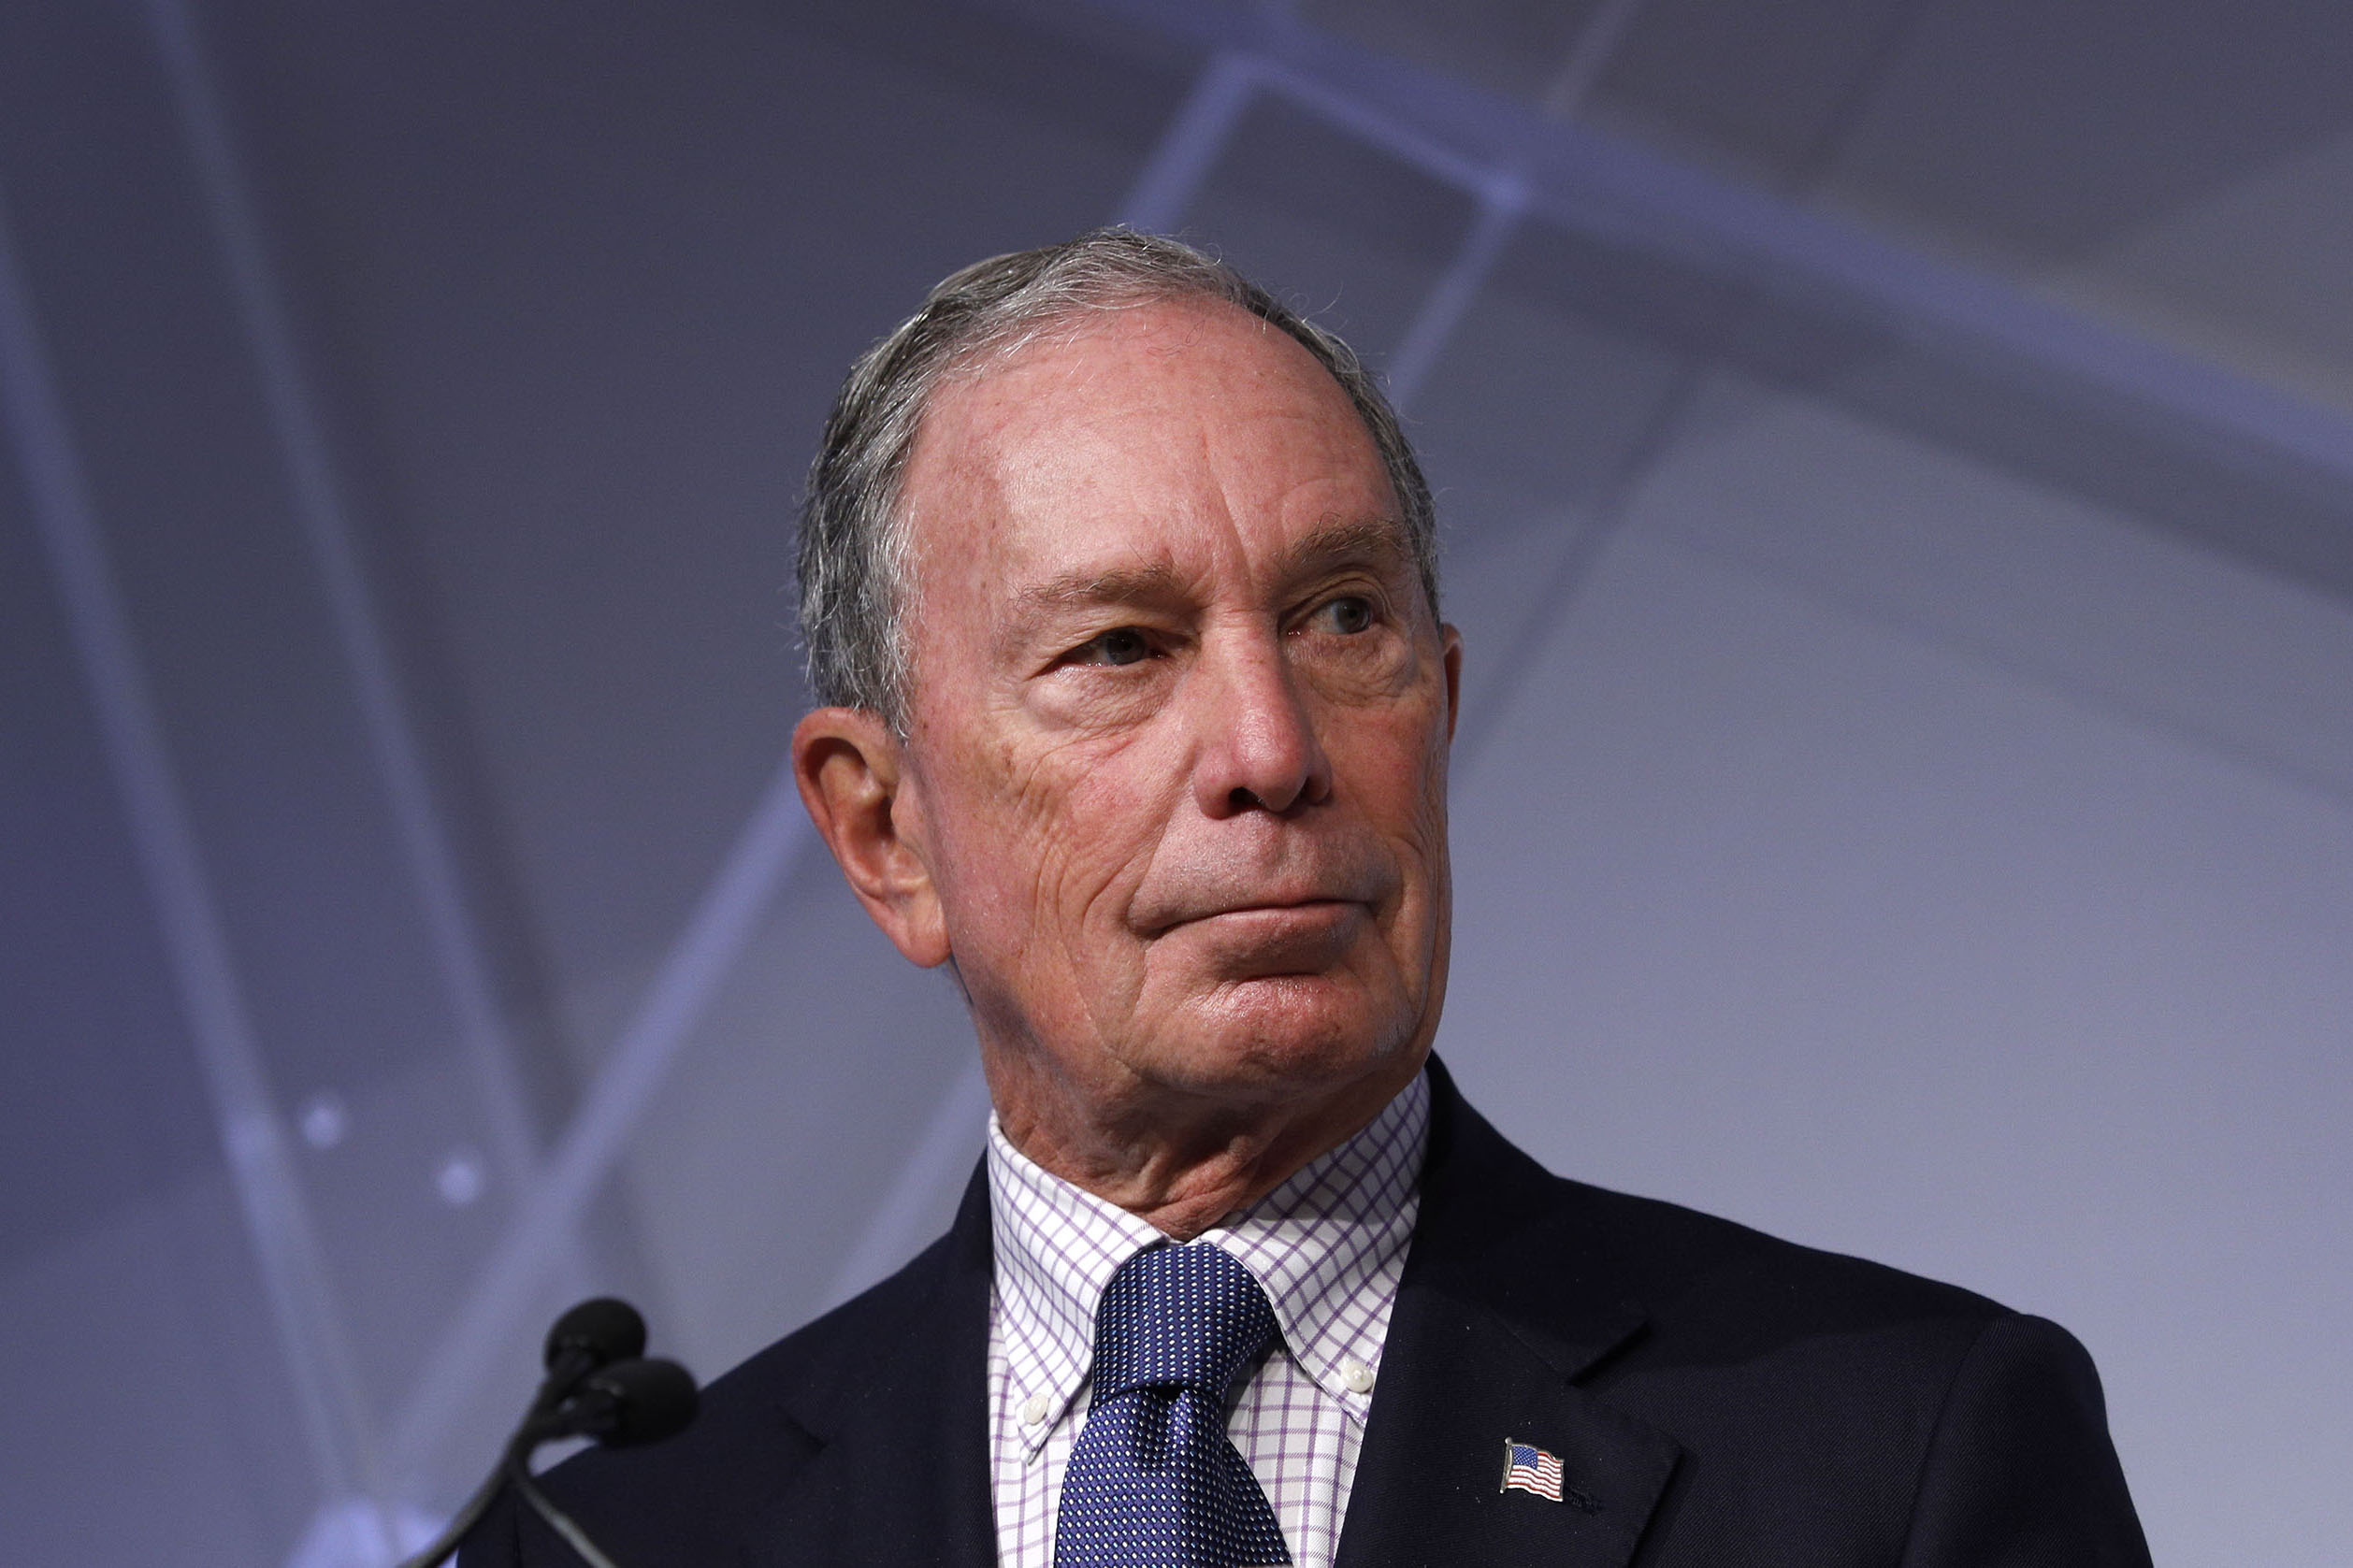 Michael Bloomberg, billionaire and alumnus of Johns Hopkins University, speaks at CityLab Detroit, a global city summit, on October 29, 2018 in Detroit, Michigan. (Photo by Bill Pugliano/Getty Images)